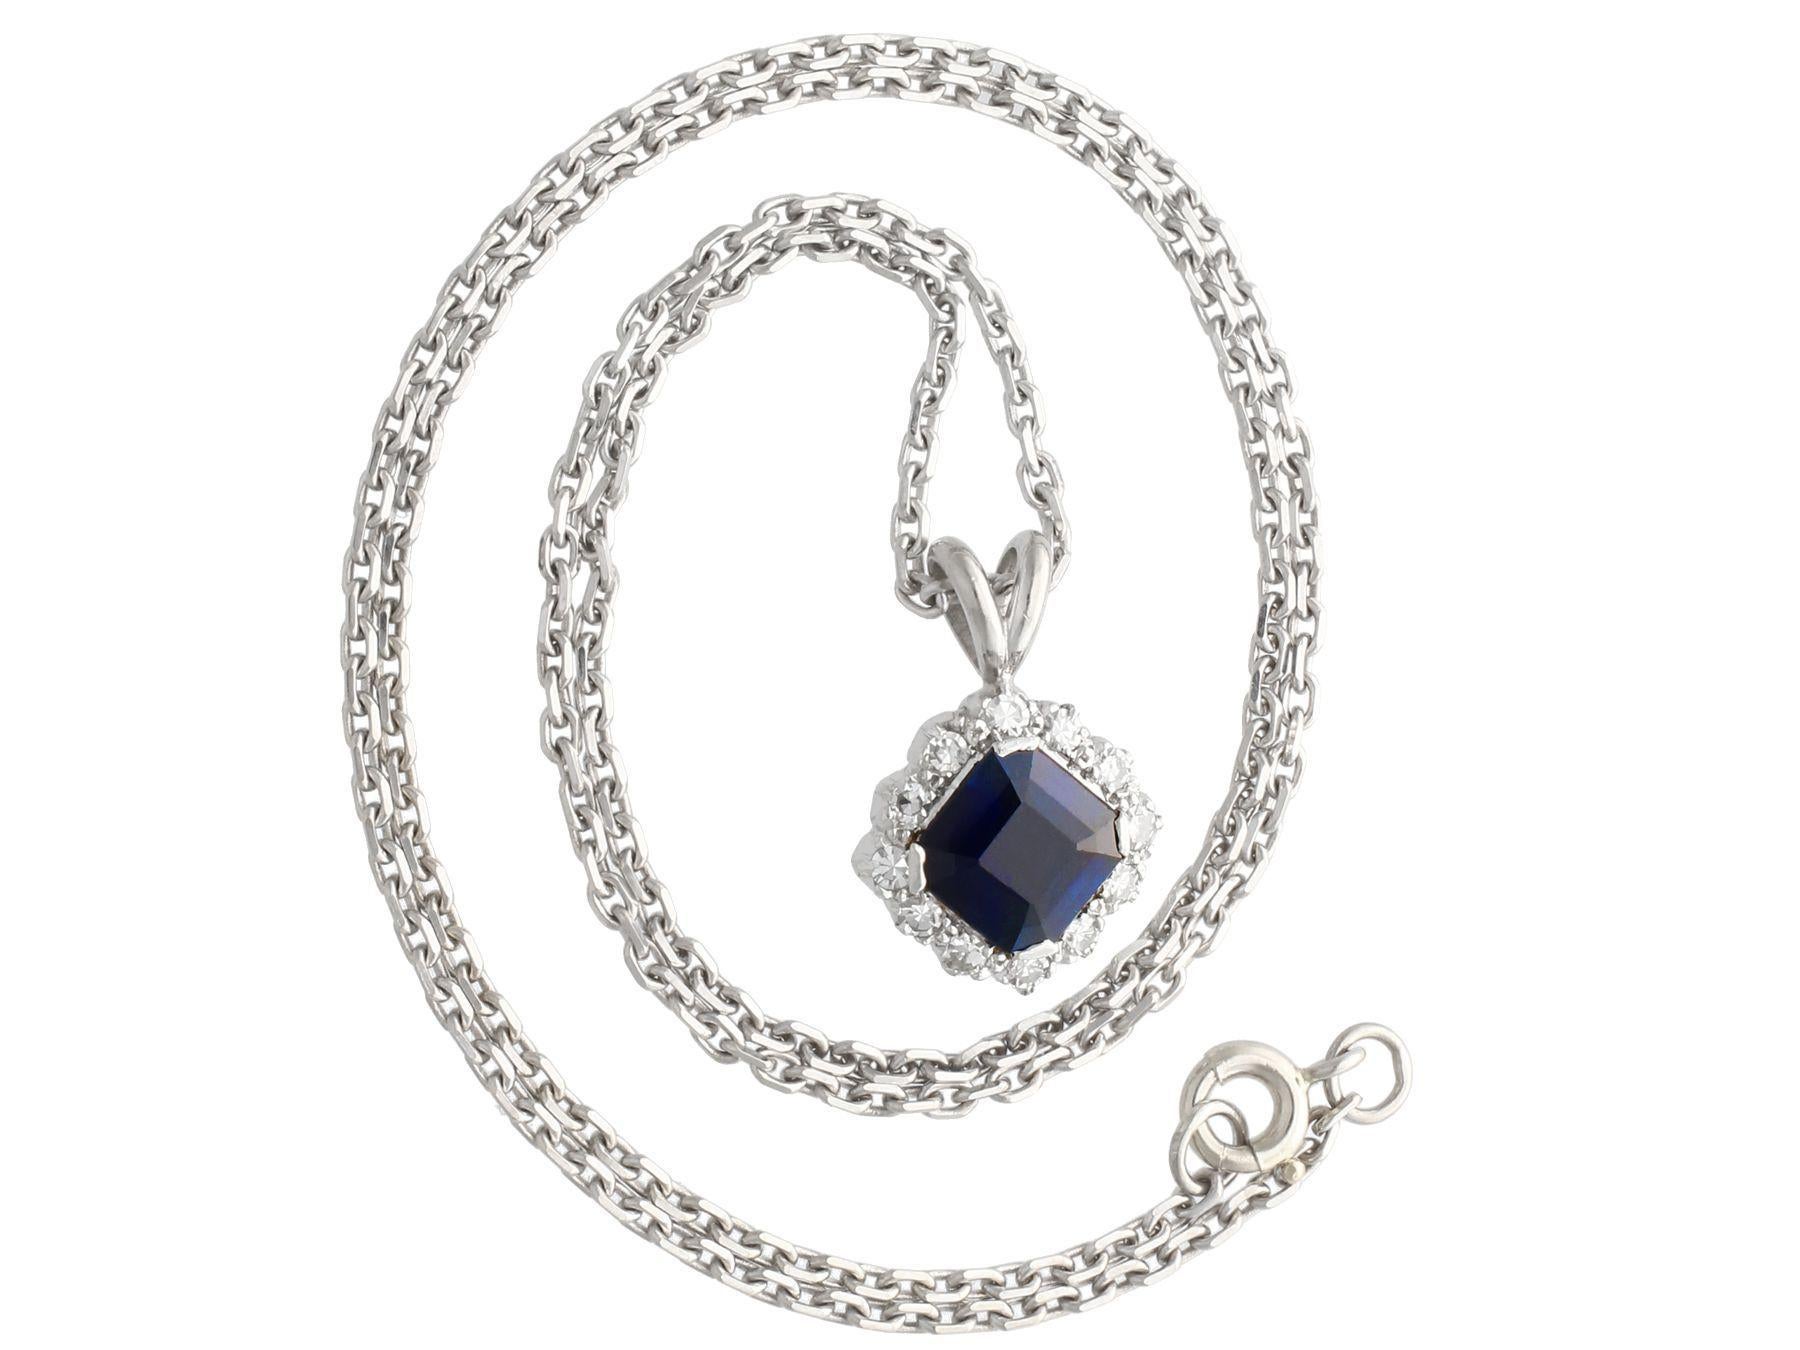 A fine and impressive vintage 2.35 carat blue sapphire and 0.32 carat diamond, platinum cluster pendant; part of our diverse gemstone jewelry collections.

This fine and impressive sapphire pendant has been crafted in platinum.

The pierced